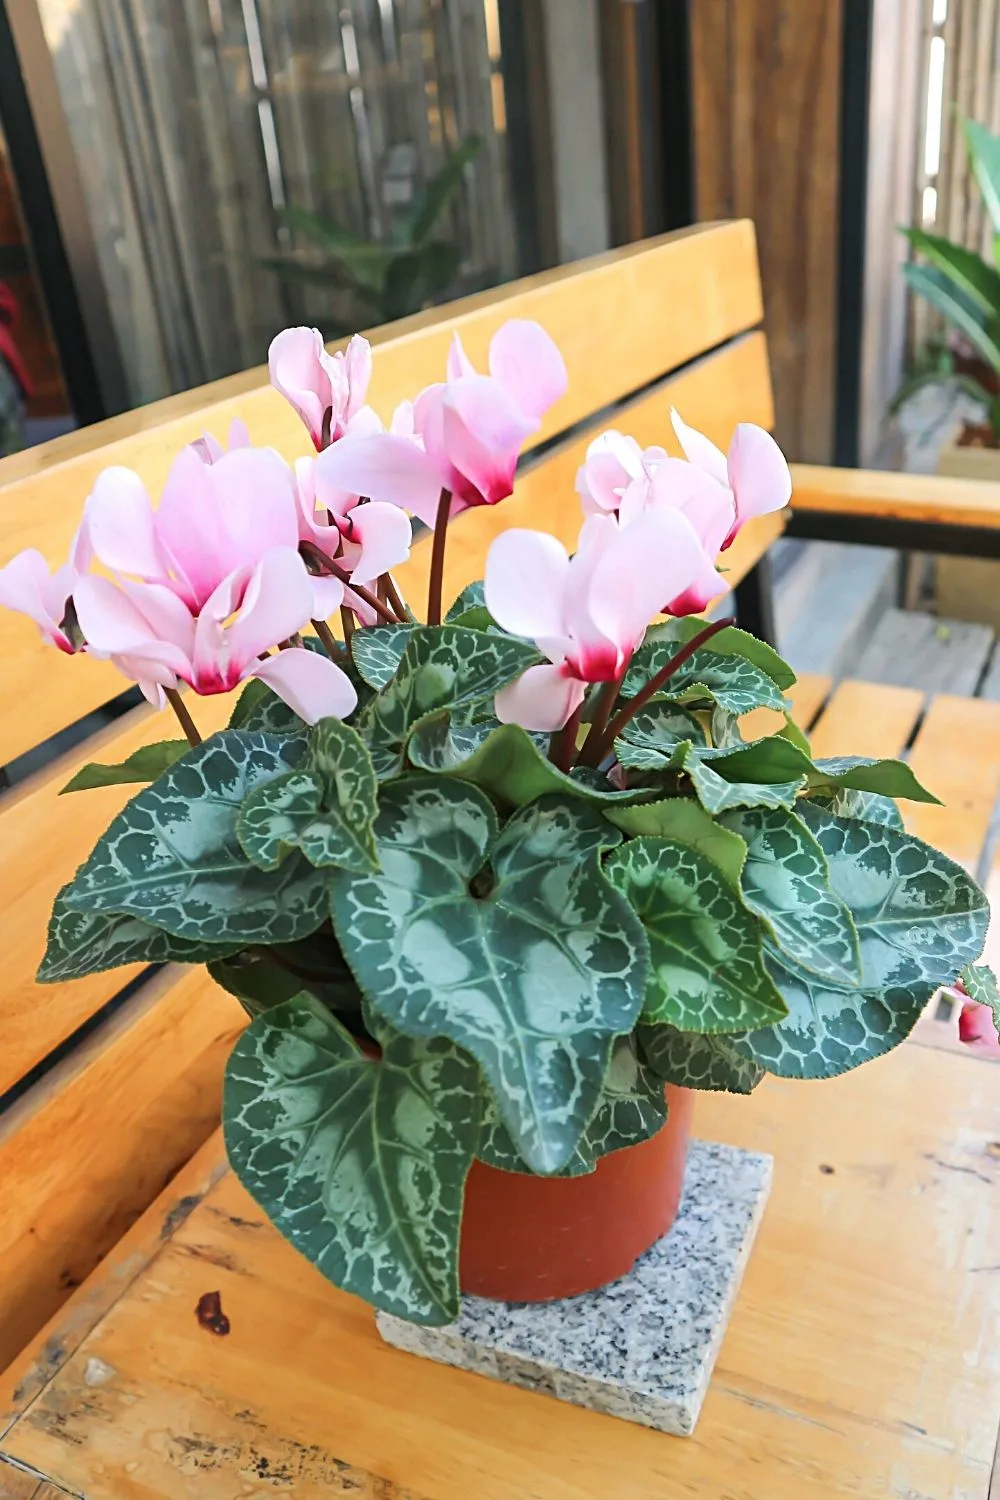 If you're looking for an exotic plant to grow by your northeast-facing window, Cyclamen is one of your best choices